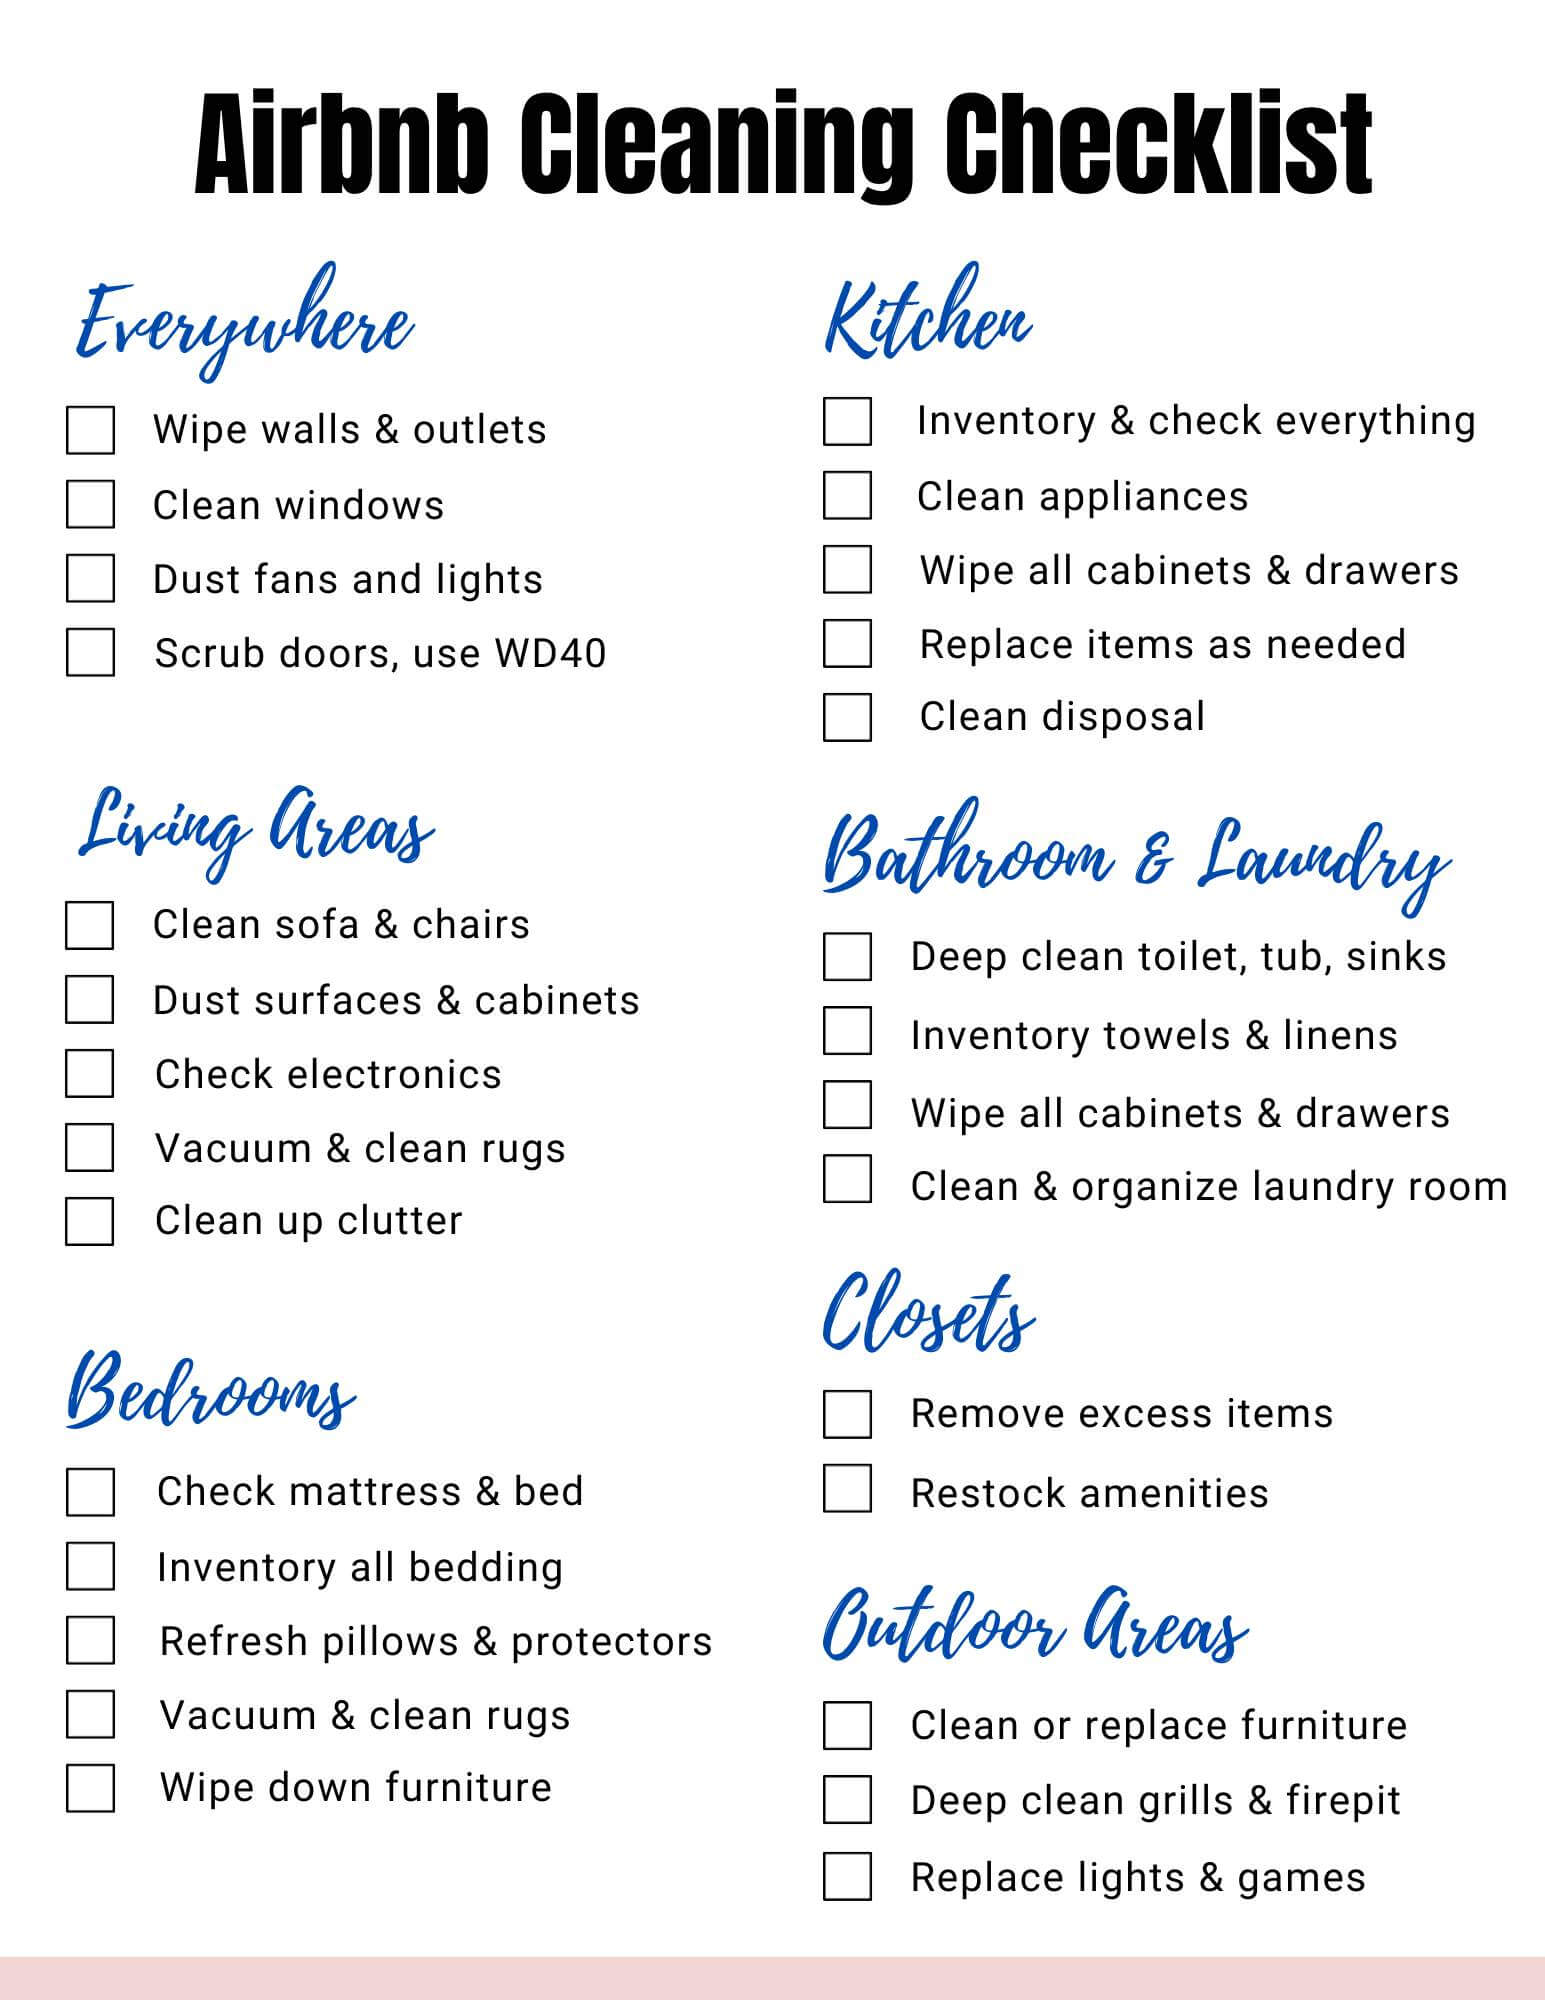 TIDY vs. TurnoverBnB – Which Airbnb Cleaning Services Are Best? - Host Tools